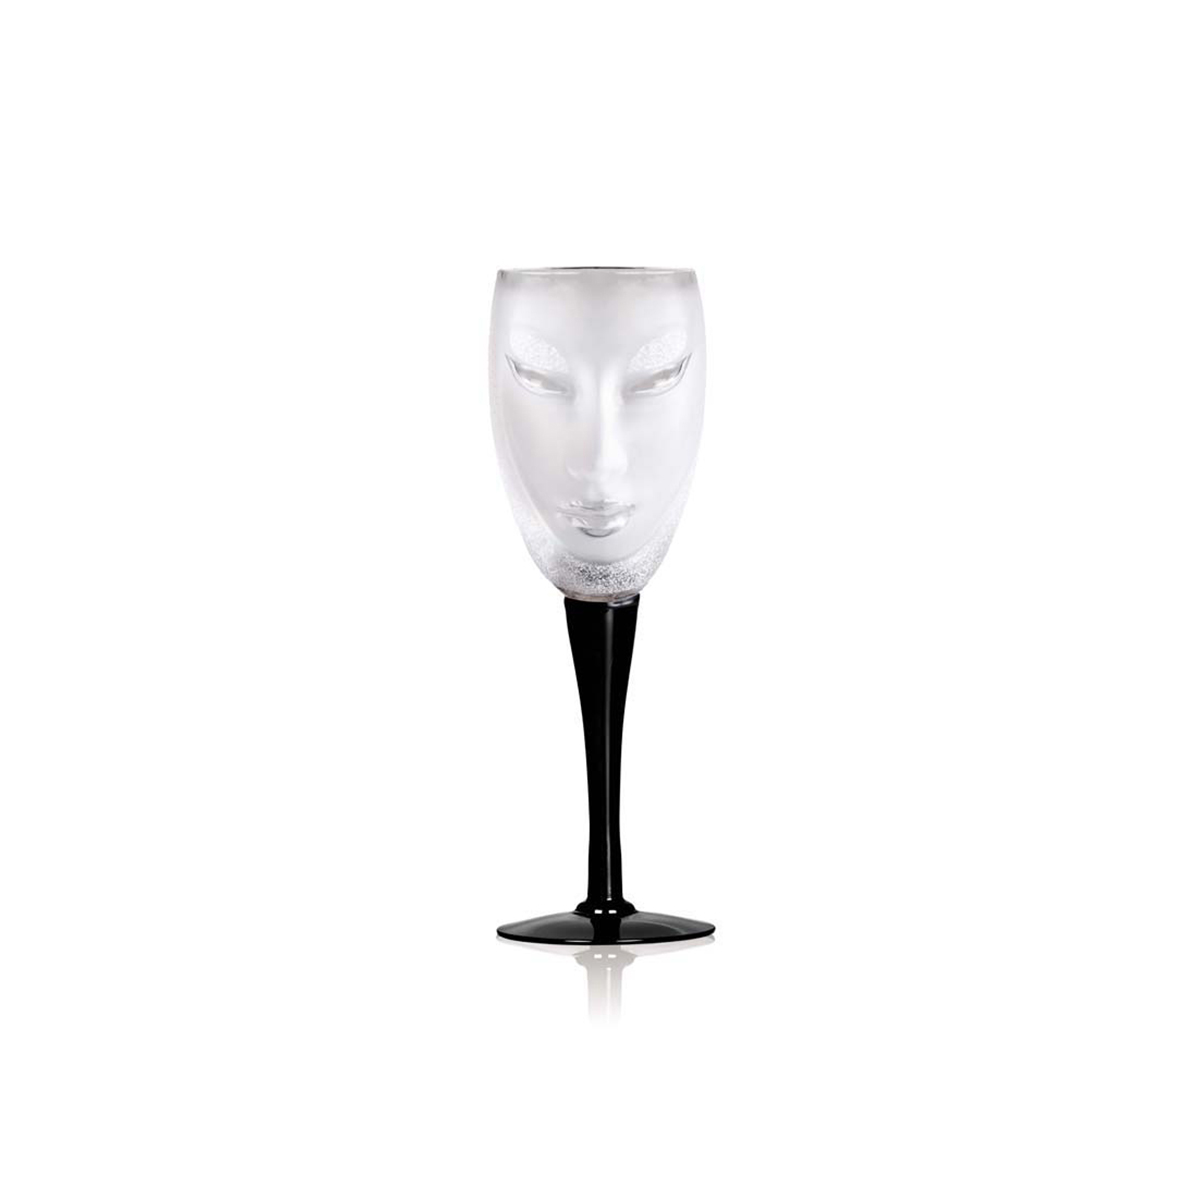  Tableware Electra Wine glass MASQ Series High Foot Red/White Wine Cup Art Gift